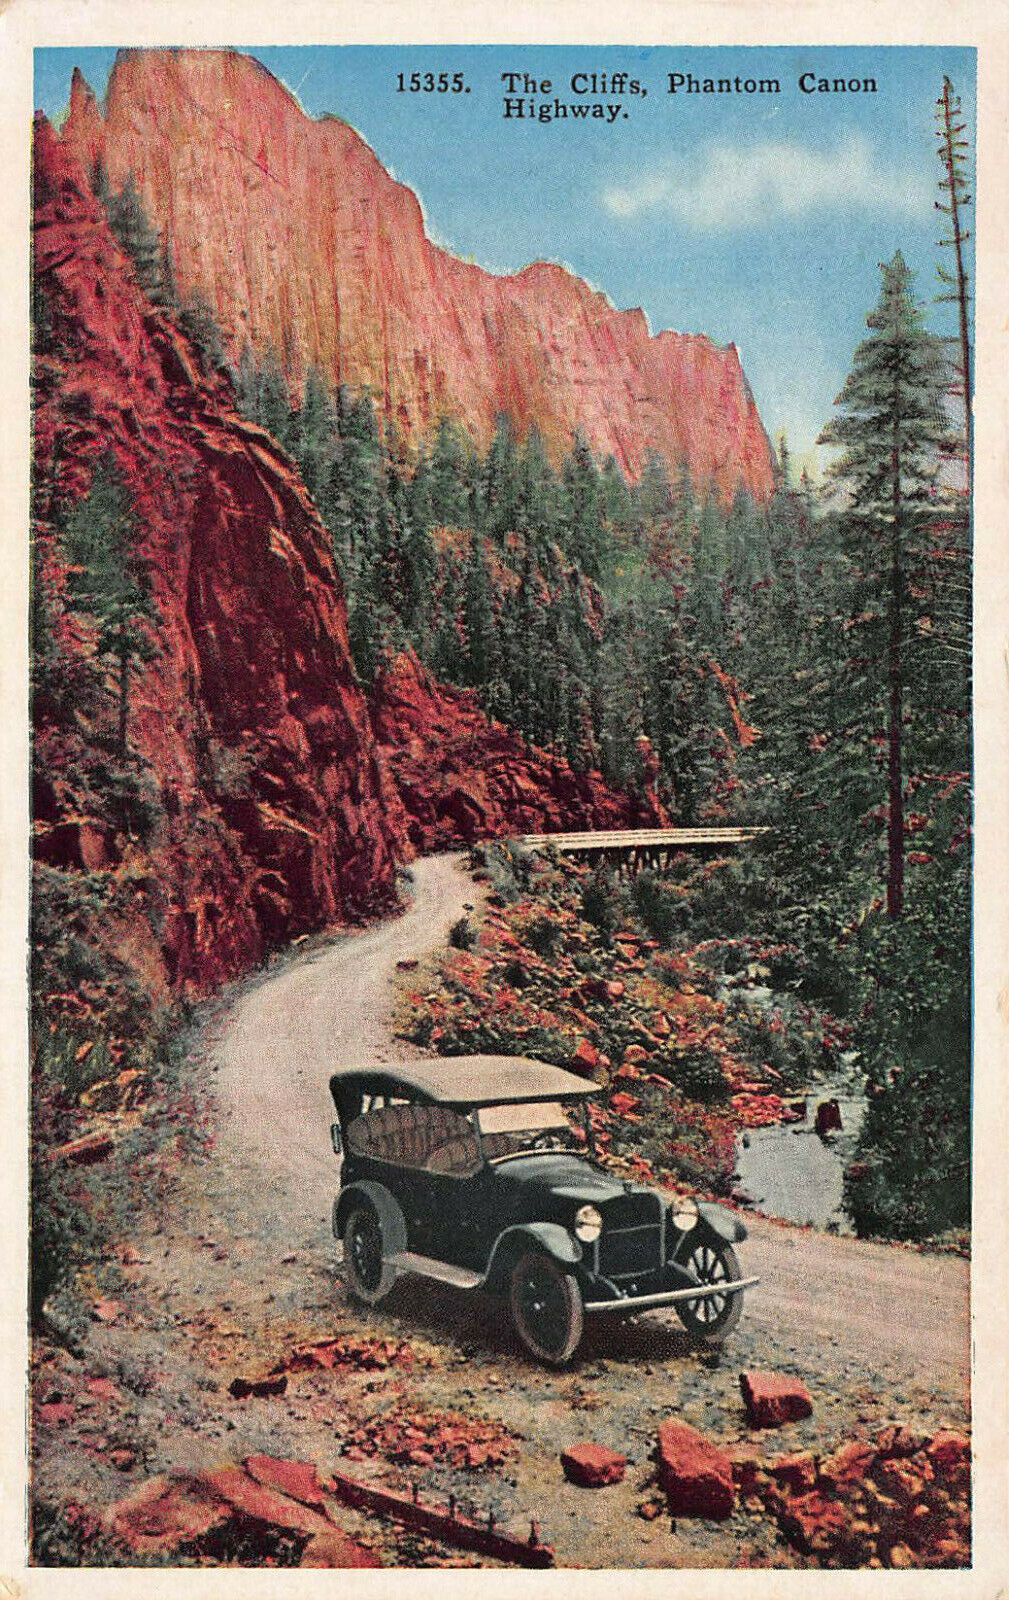 The Cliffs, Phantom Canon Highway, Colorado and Car, Early Postcard, Unused 